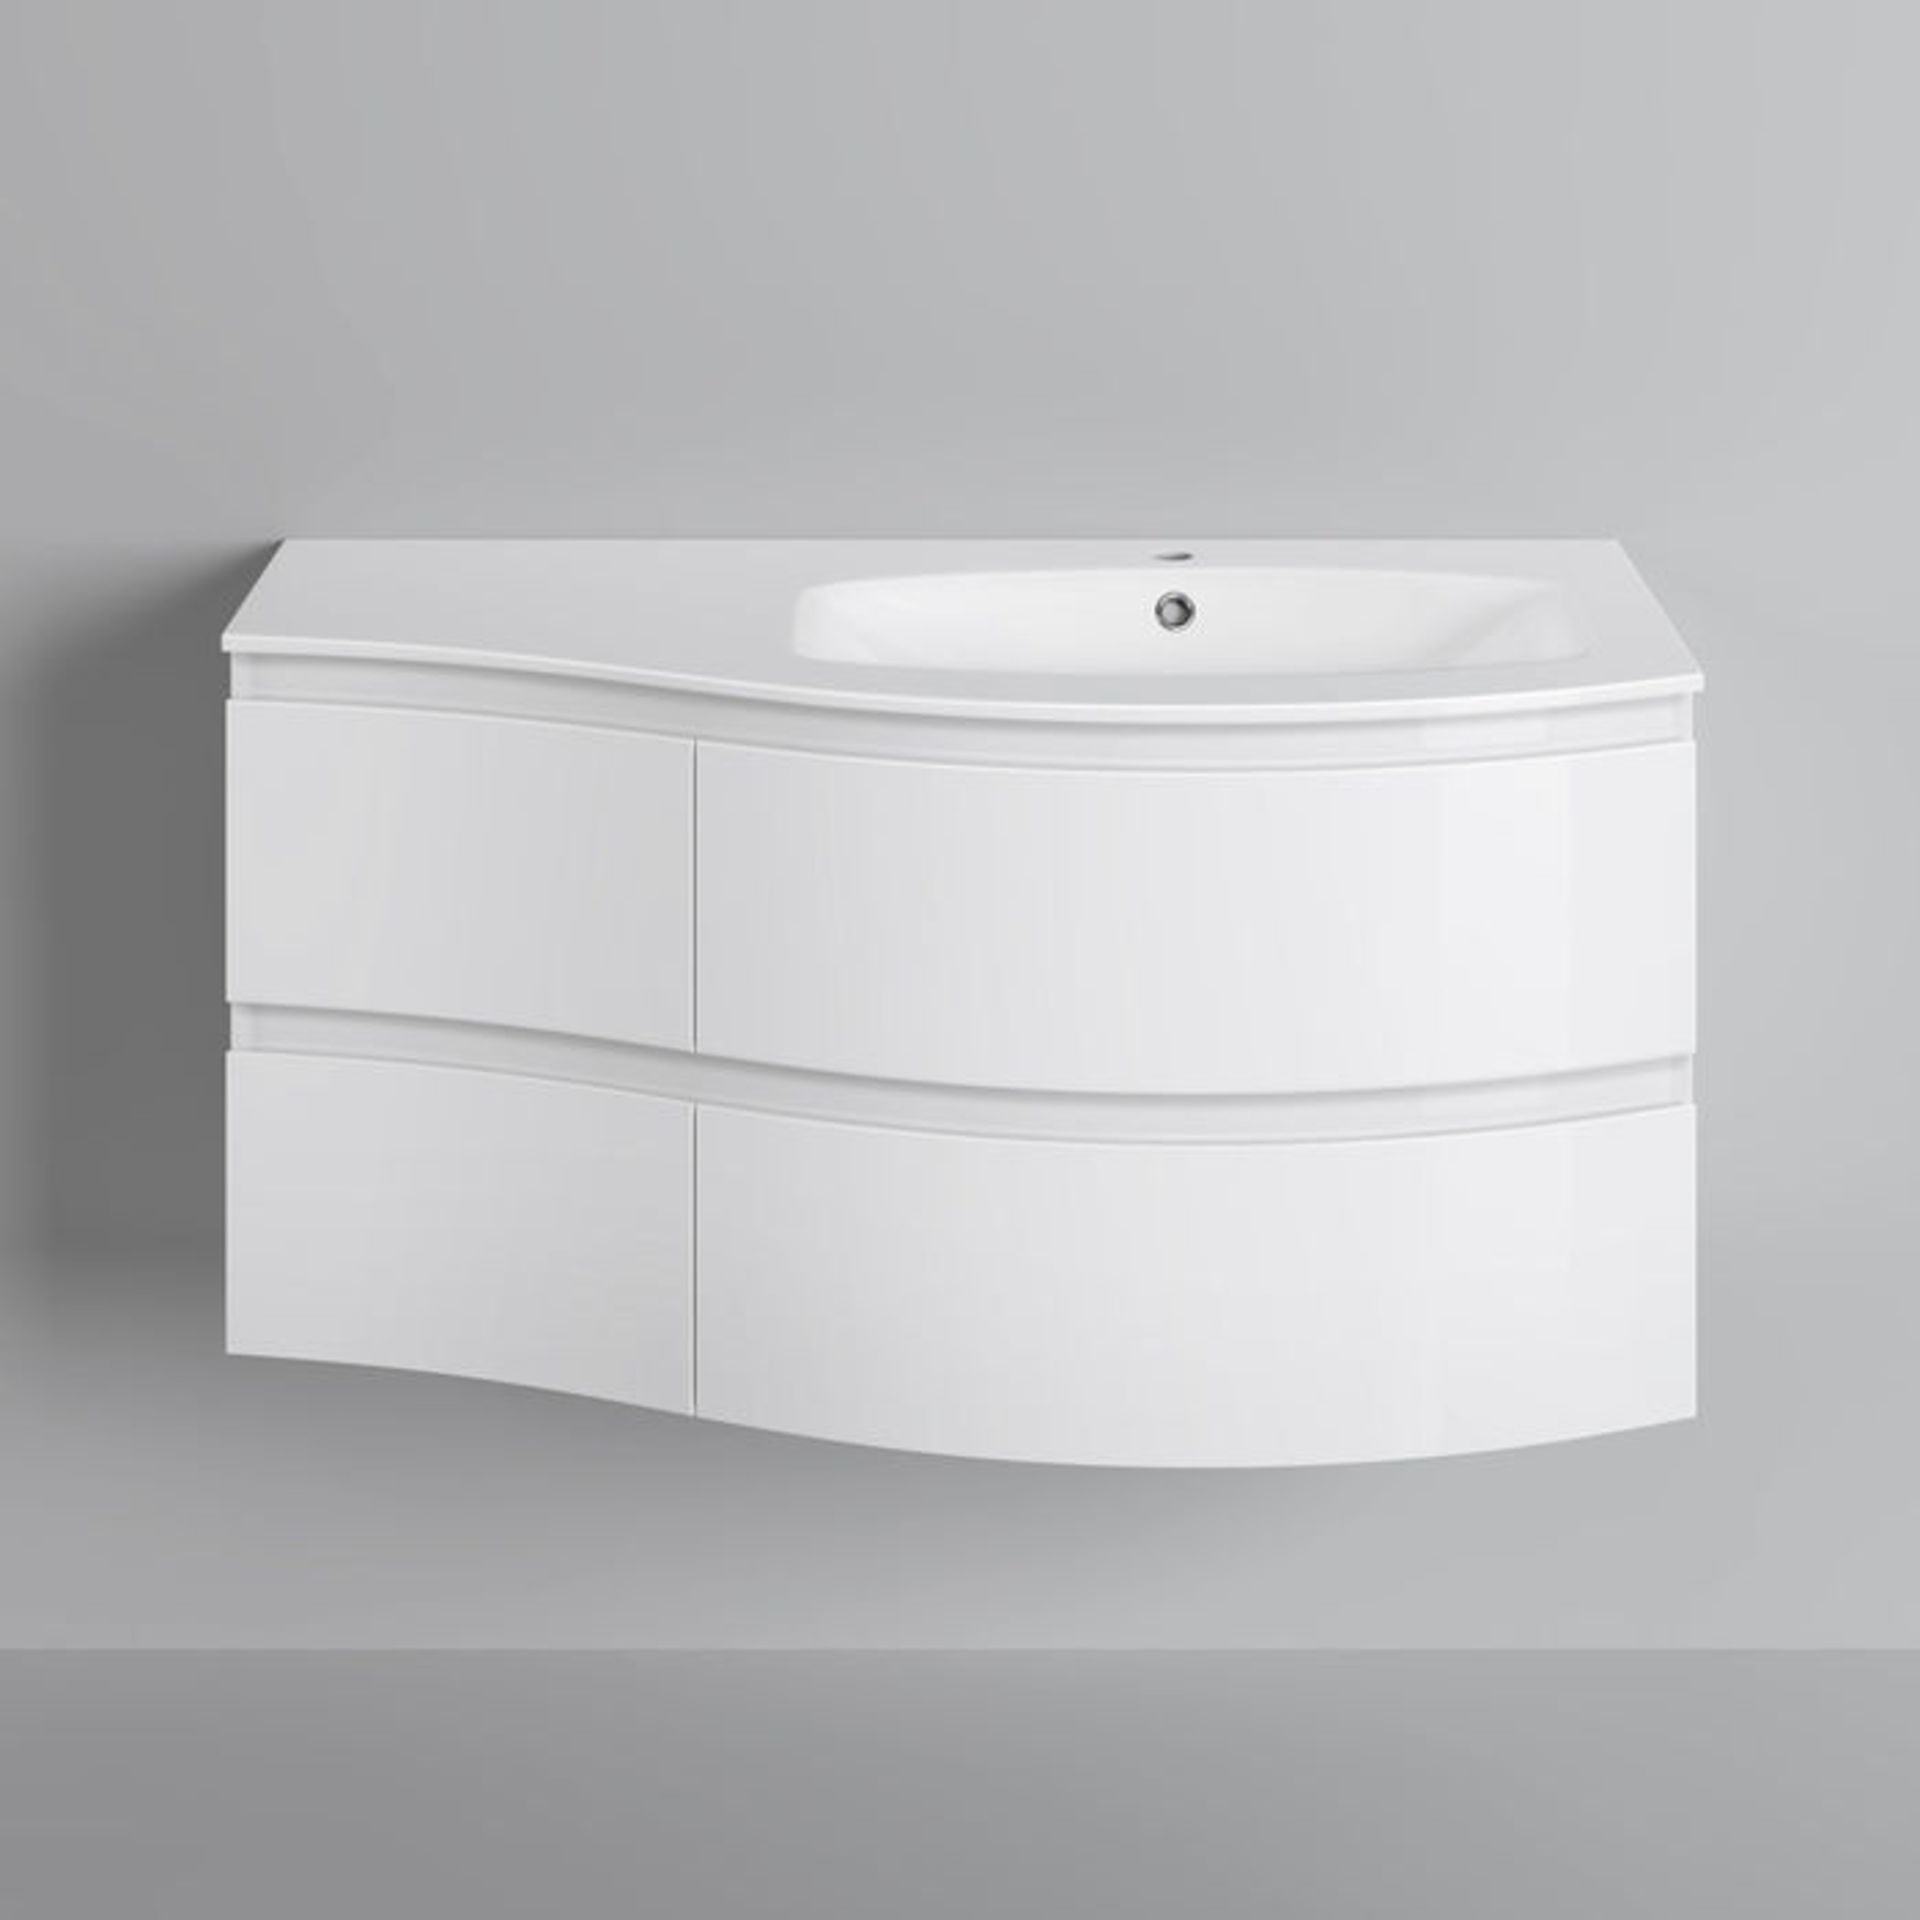 BRAND NEW 1040mm Amelie High Gloss White Curved Vanity Unit - Right Hand - Wall Hung. RRP £1,499. - Image 5 of 5